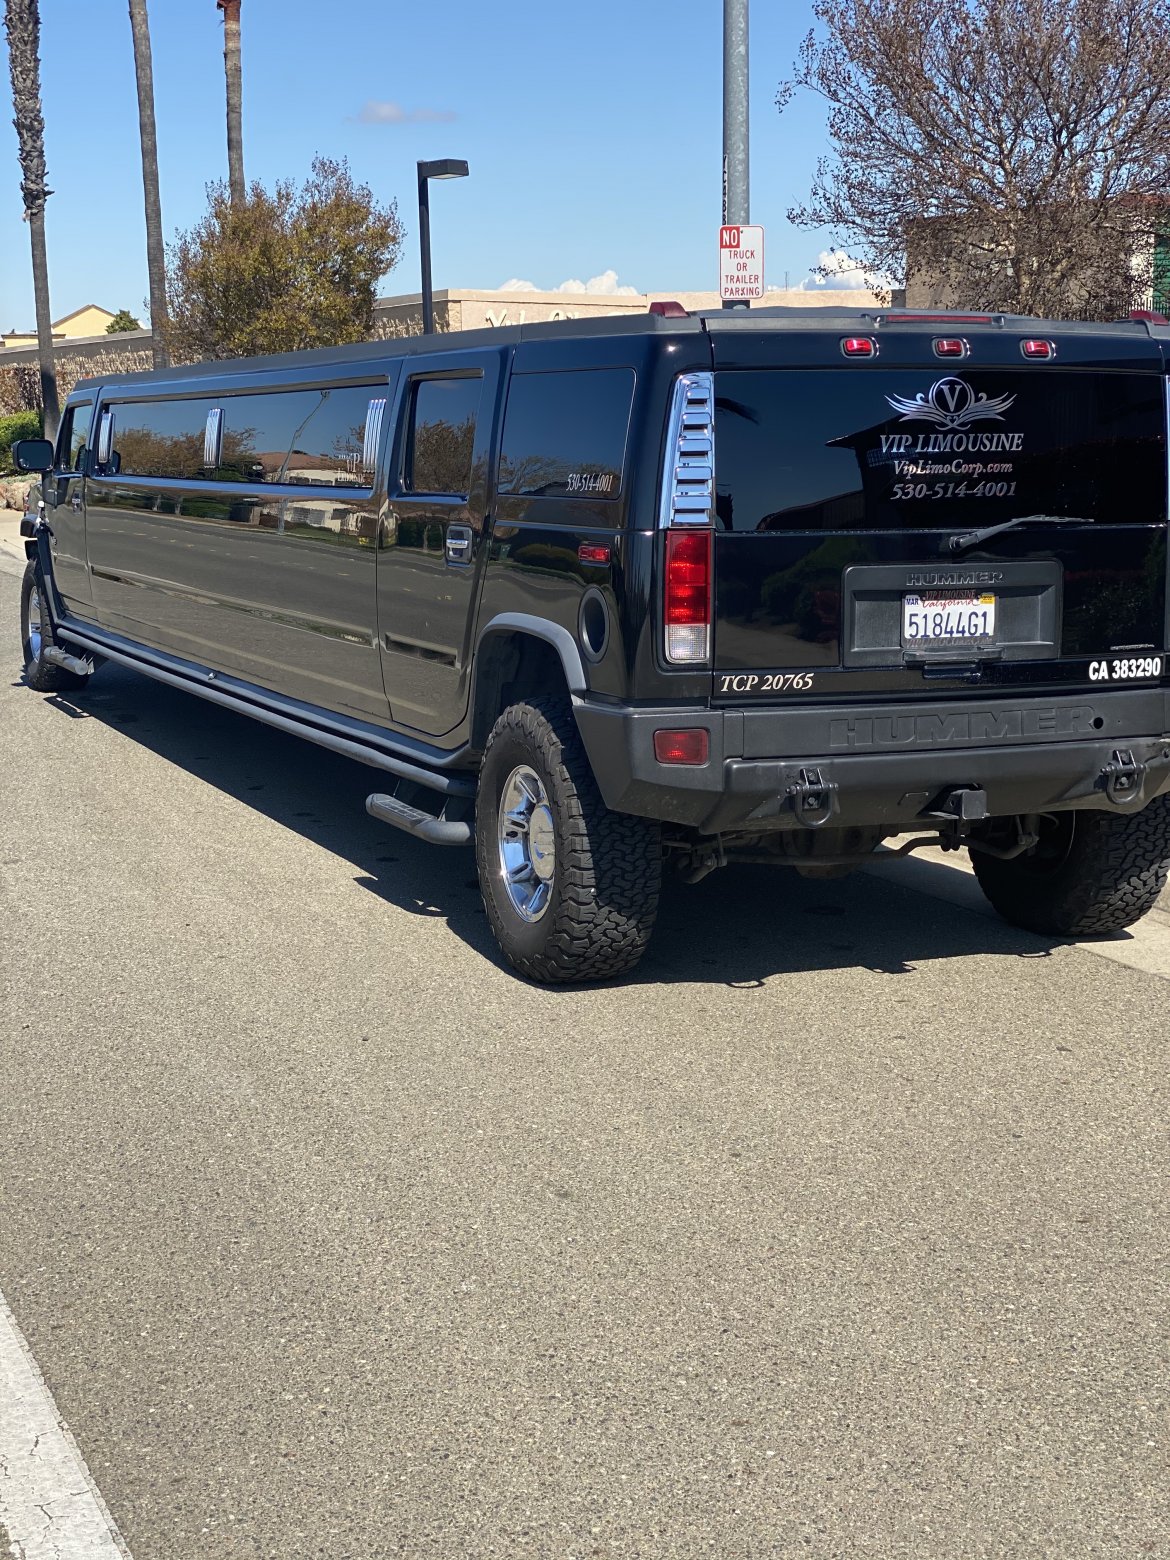 SUV Stretch for sale: 2007 Hummer H2 200&quot; by Krystal